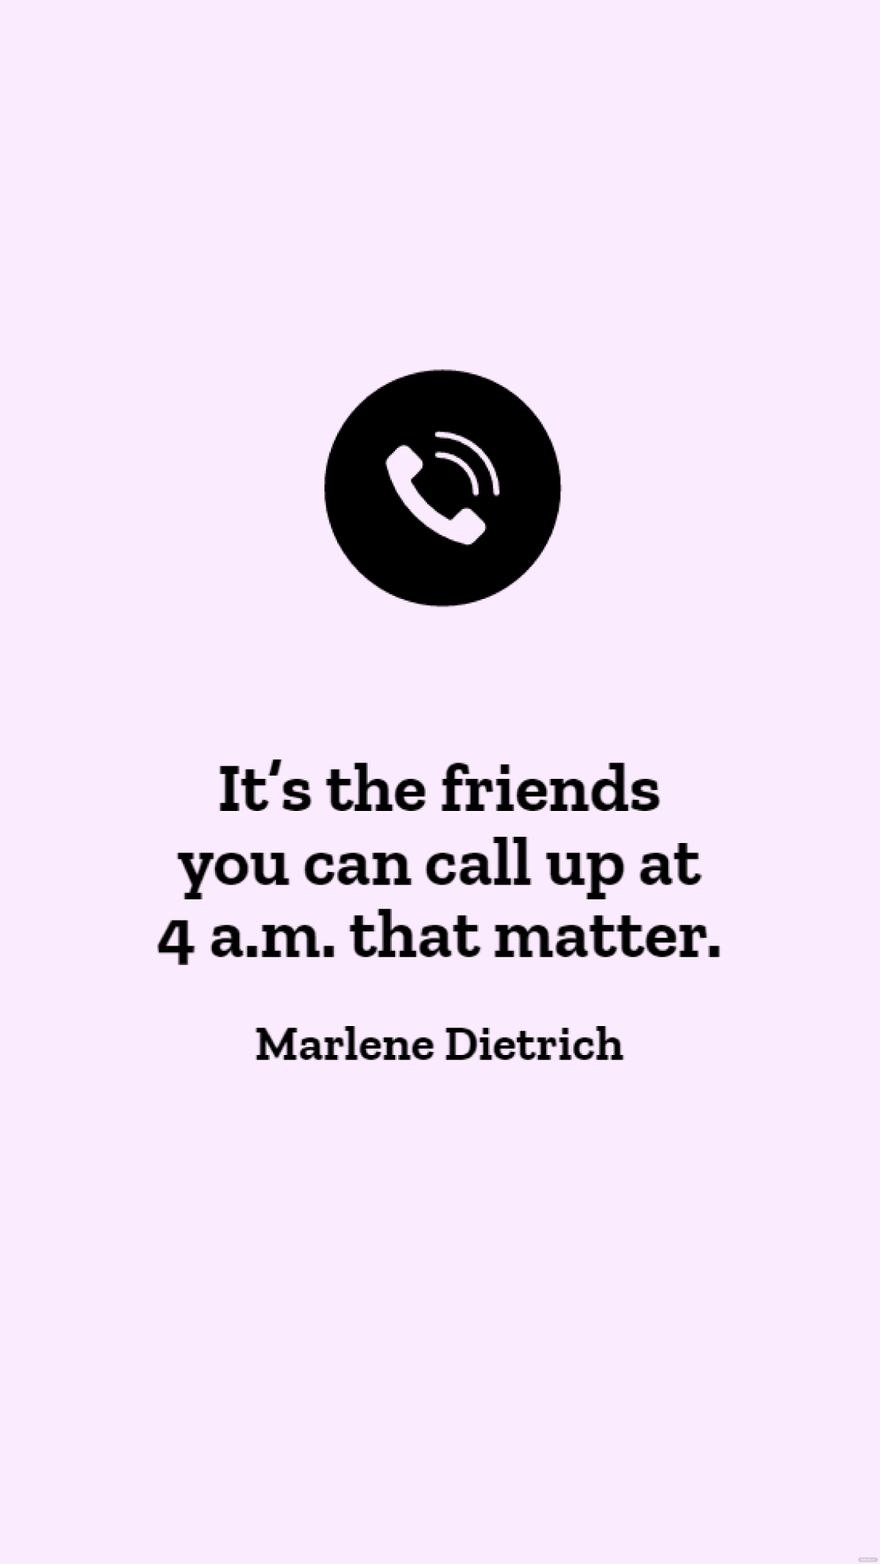 Free Marlene Dietrich - It’s the friends you can call up at 4 a.m. that matter.